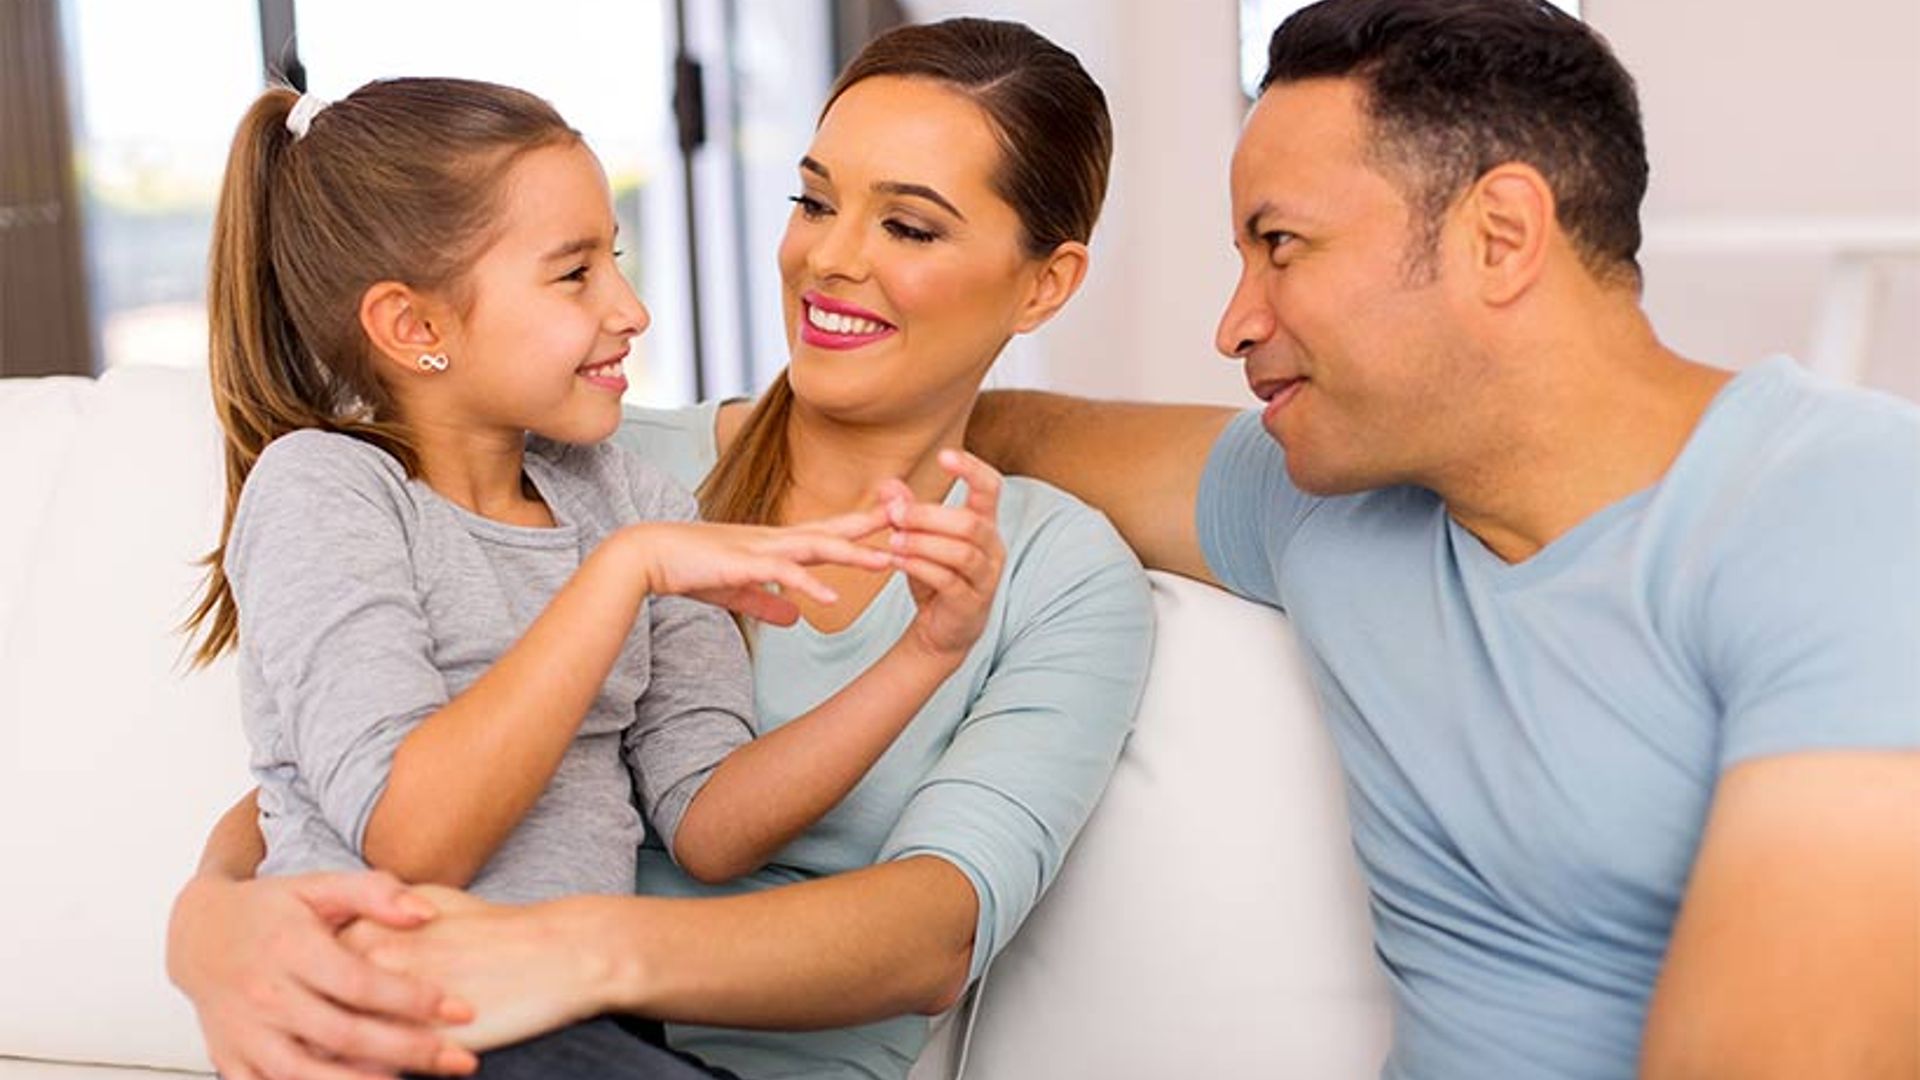 British parents only spend 44 minutes a day talking to their children